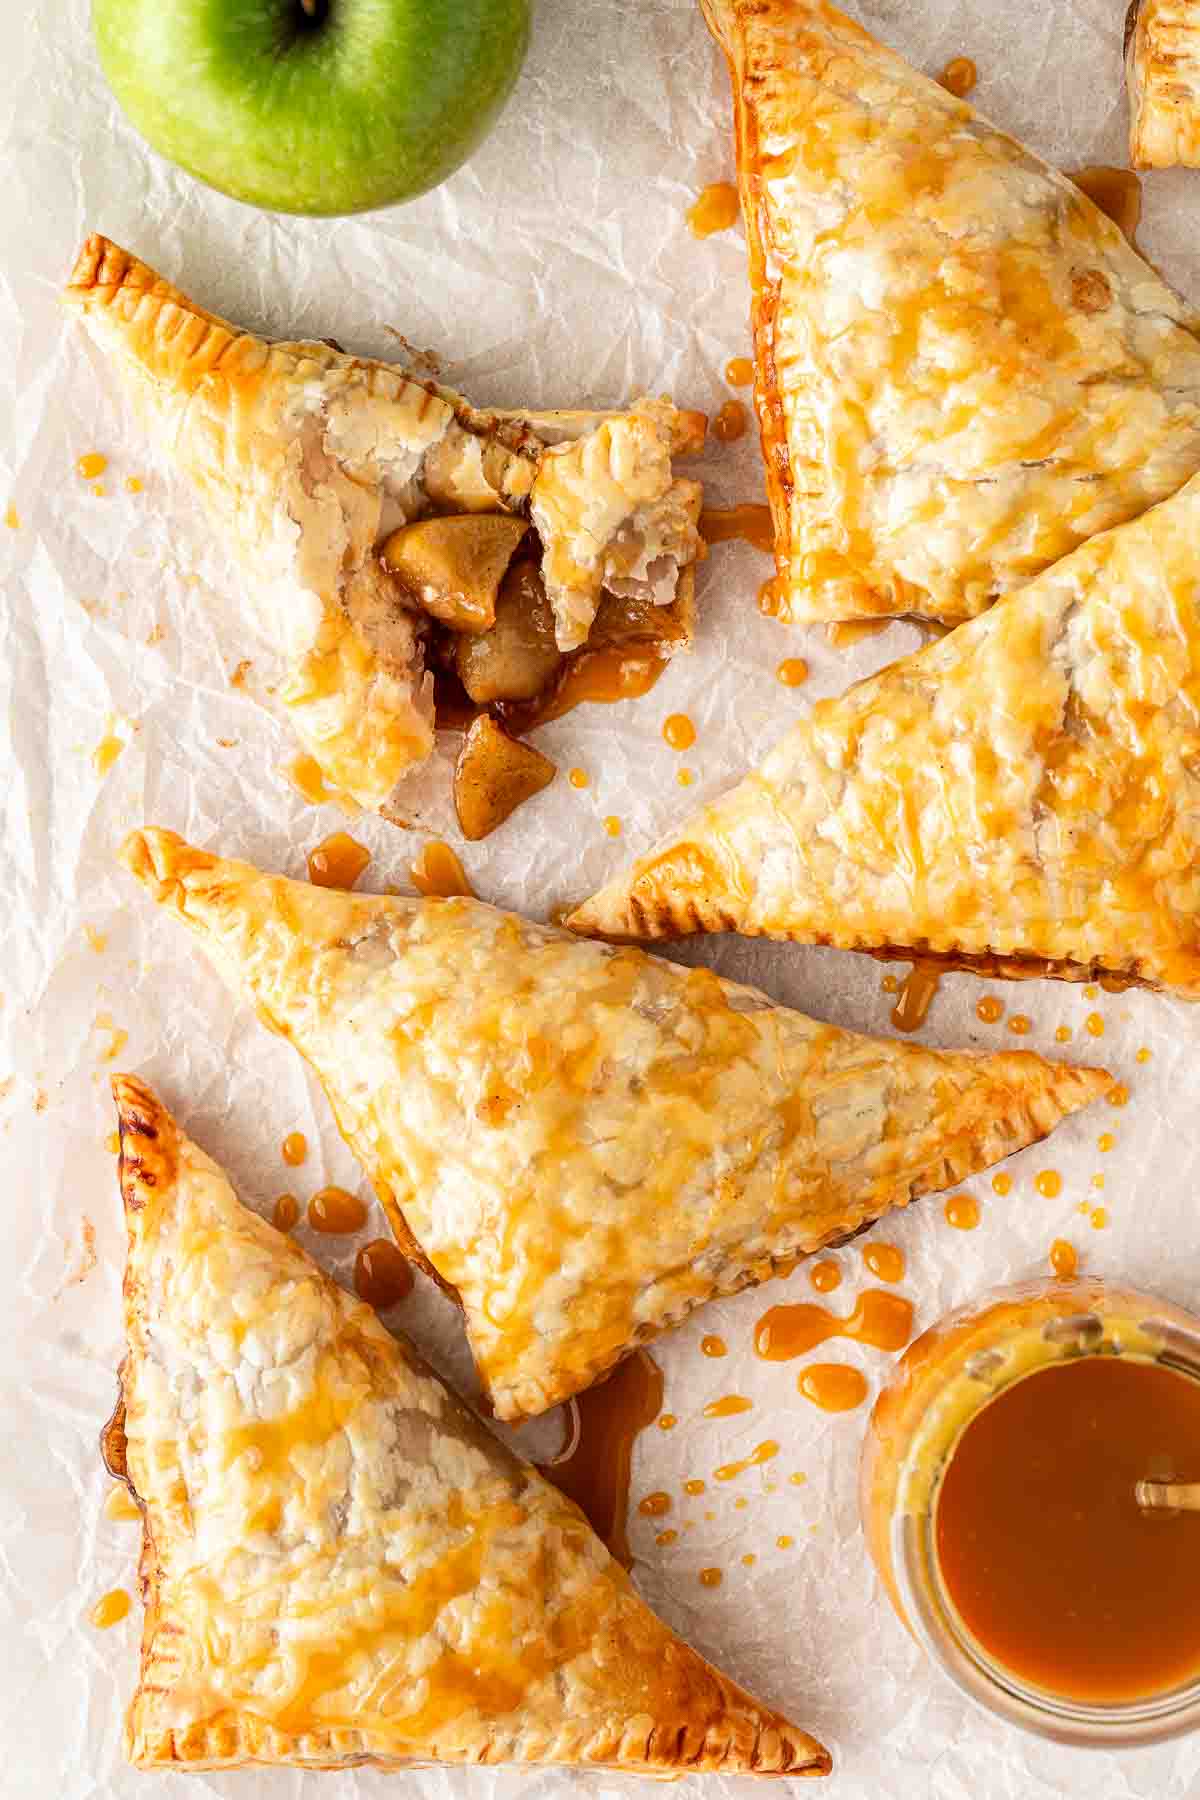 Apple turnovers laid out with salted caramel sauce drizzle.